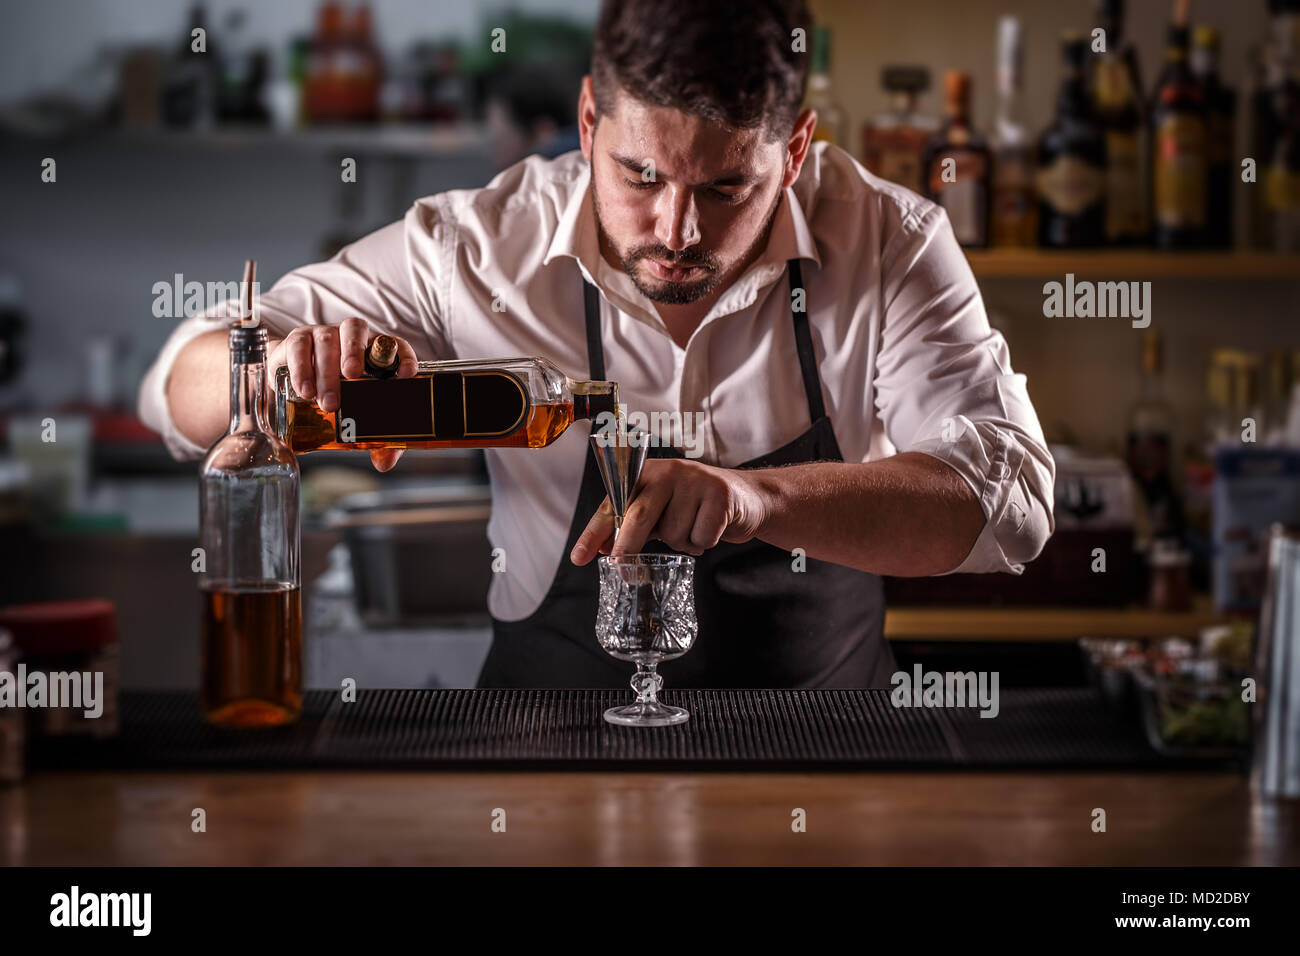 Bartender preparing alcohol cocktail drink, pouring rum filling a jigger Stock Photo